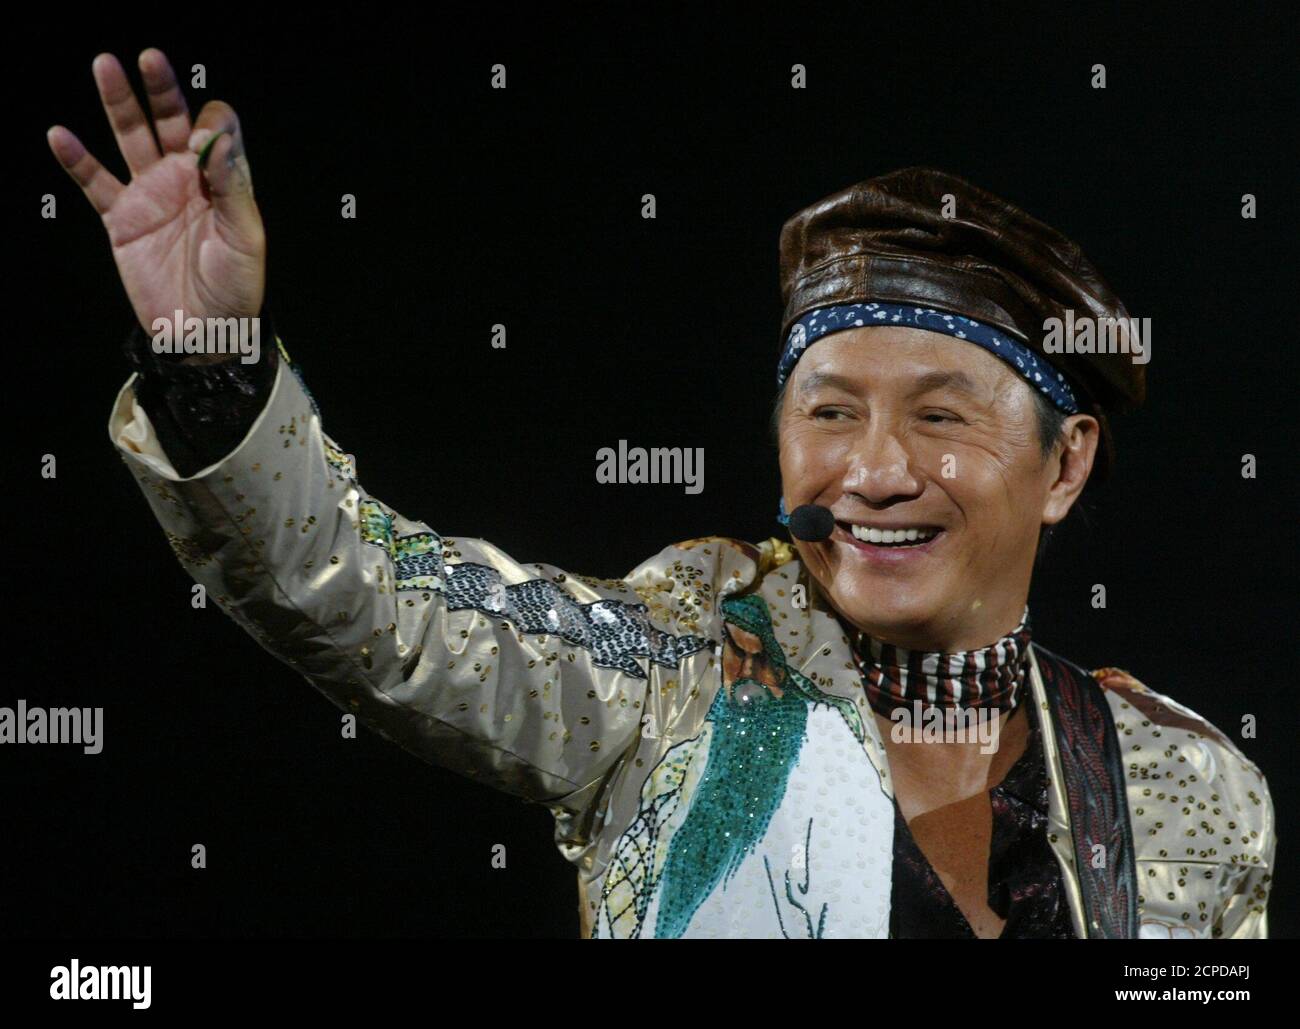 Hong Kong singer-actor Sam Hui holds his first concert after retiring for a decade in Hong Kong, June 5, 2004. Hui was Hong Kong's most popular cantopop singer and comic actor in Chinese communities around the world in the 1970s. REUTERS/Kin Cheung  KC/CP Stock Photo